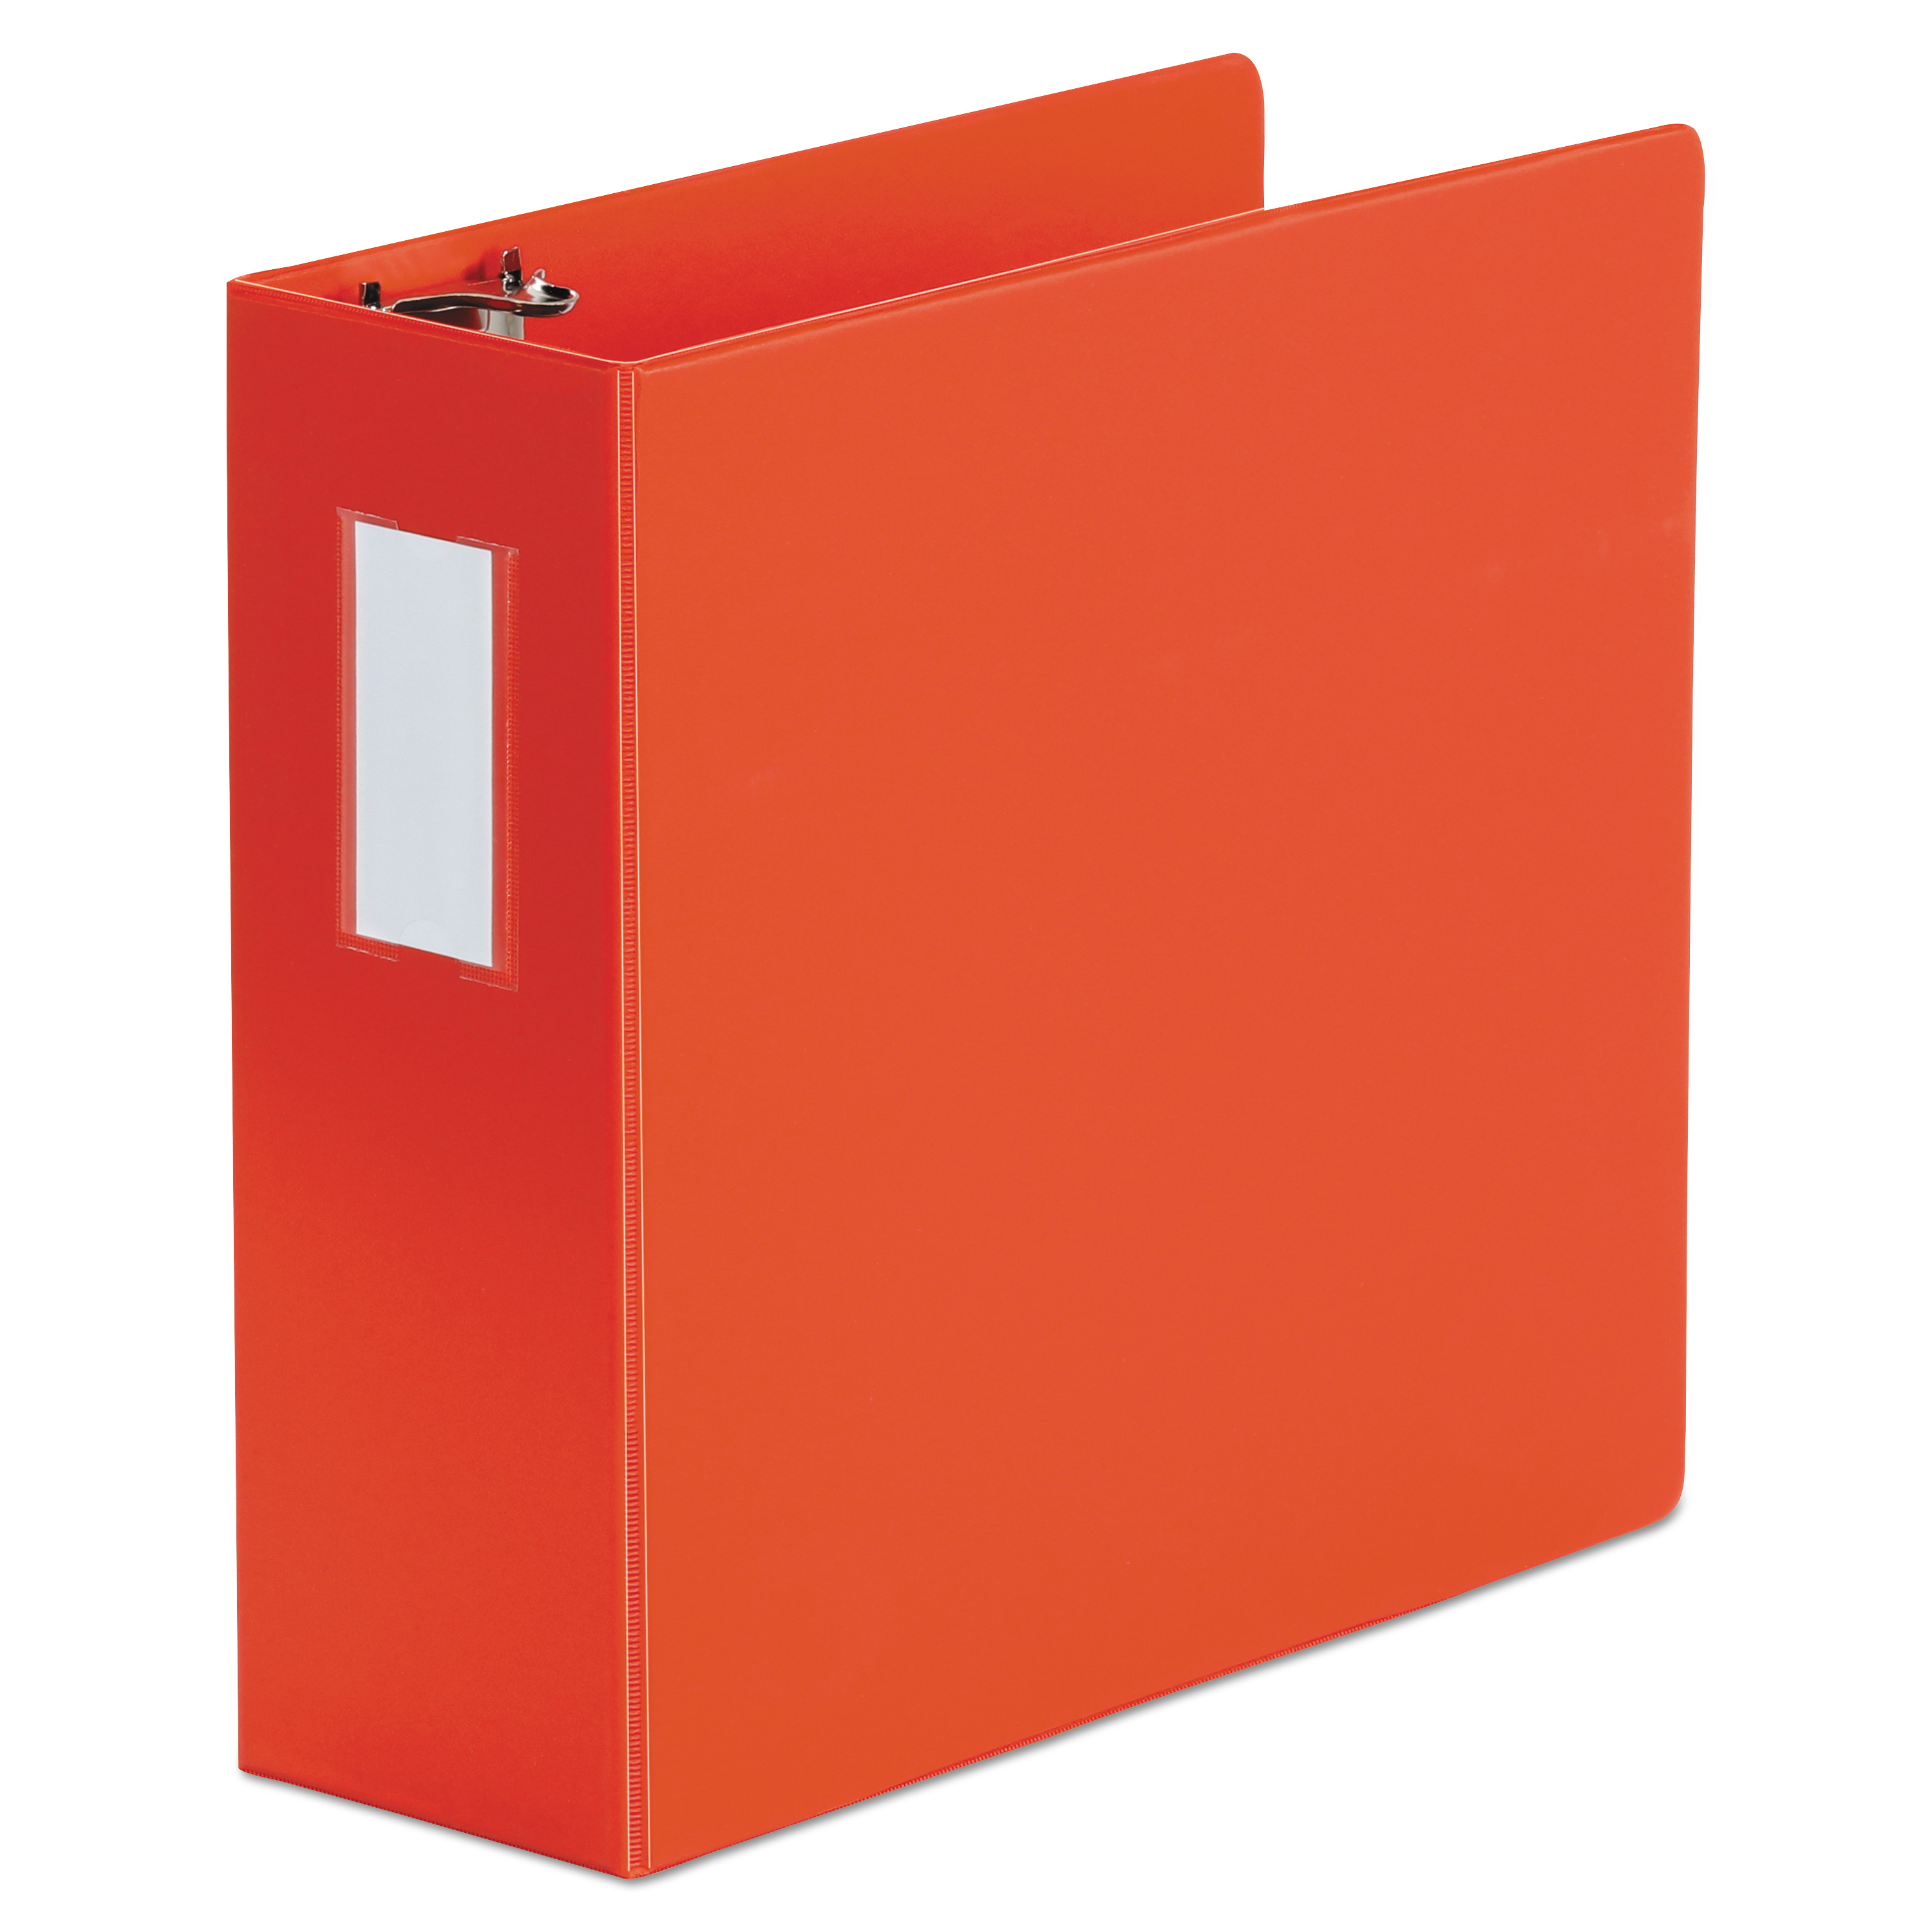  Universal UNV20708 Deluxe Non-View D-Ring Binder with Label Holder, 3 Rings, 4 Capacity, 11 x 8.5, Red (UNV20708) 